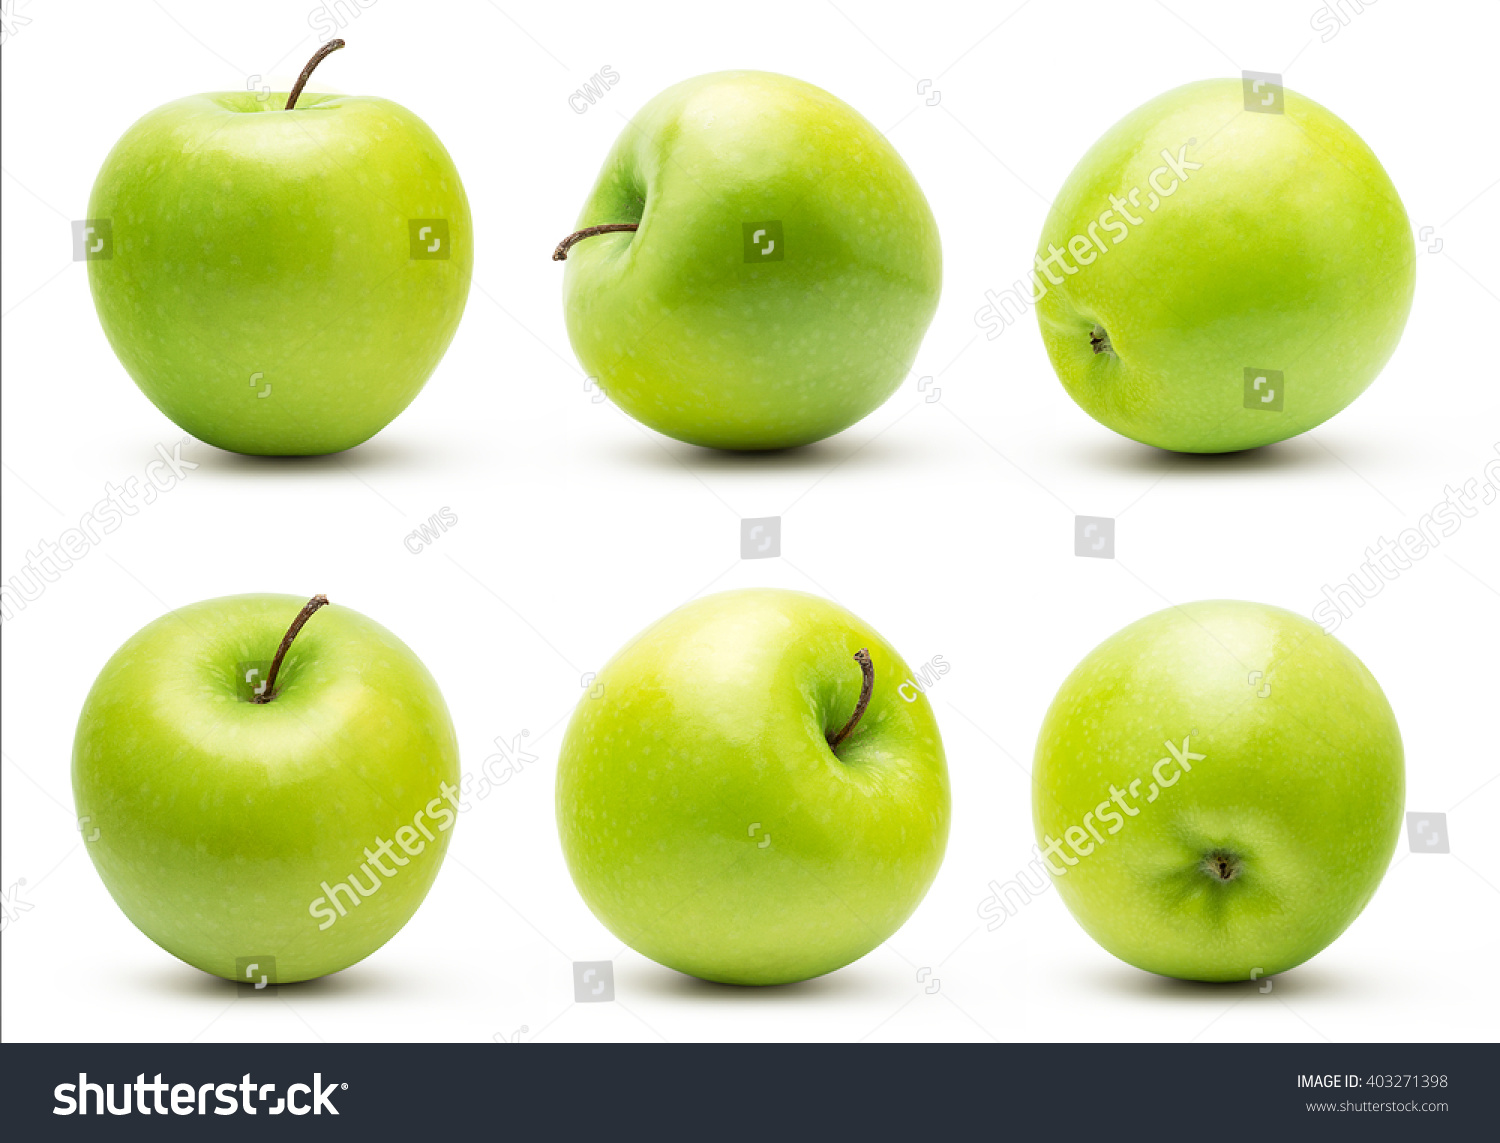 The Set of Prefect Cleaned Green Apple Isolated on White Background. #403271398